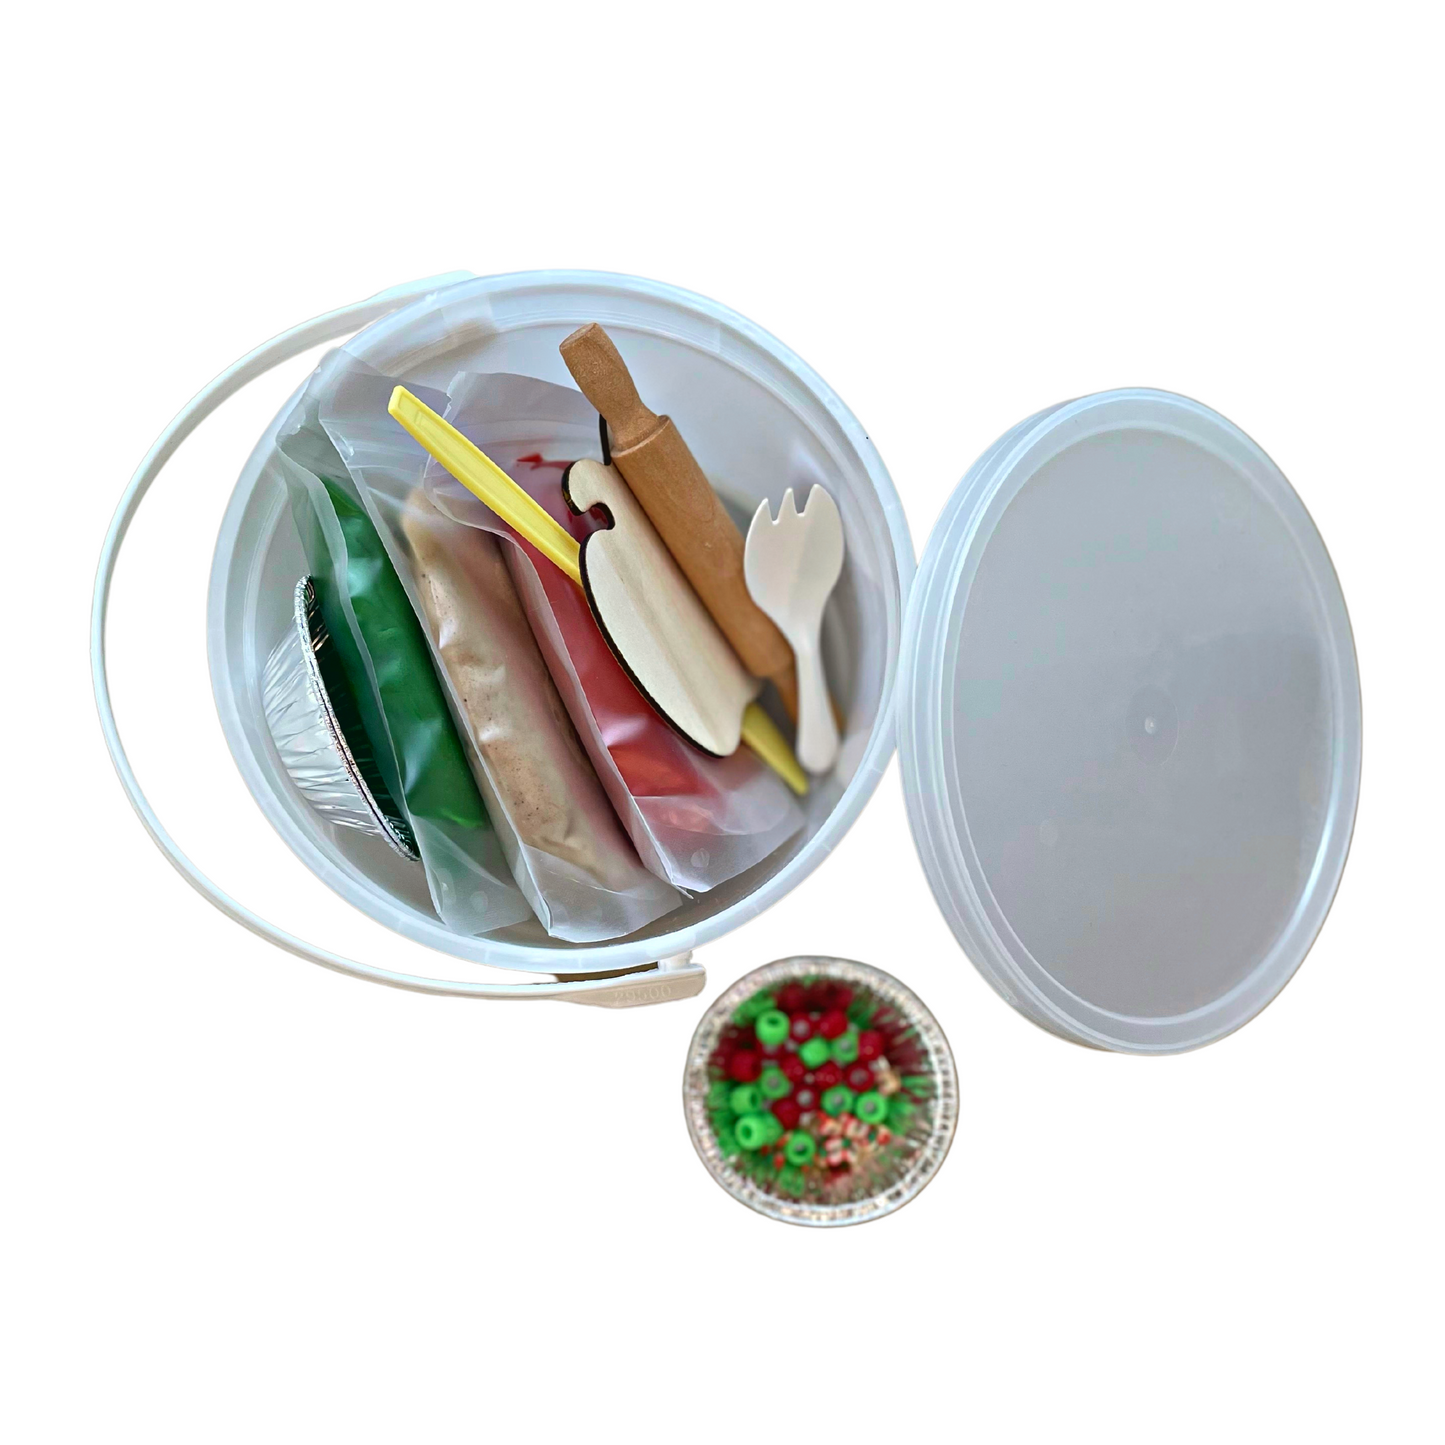 Apple Pie Play Kit comes with 3 colored play doughs, mini wooden rolling pin, trinkets and accessories, as well as custom PlayMat and parent Sense of Help, all in our Play Pail.